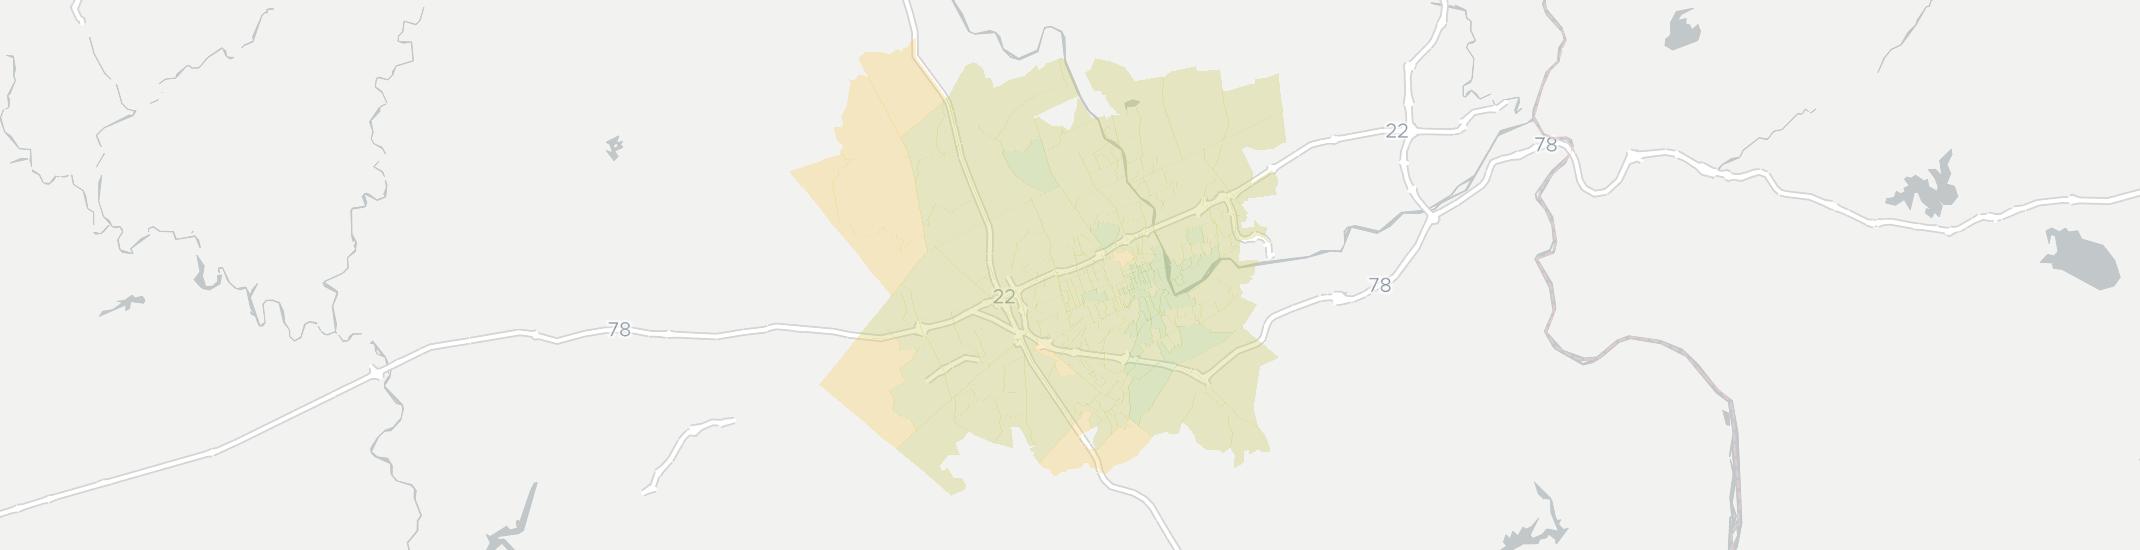 Allentown Internet Competition Map. Click for interactive map.